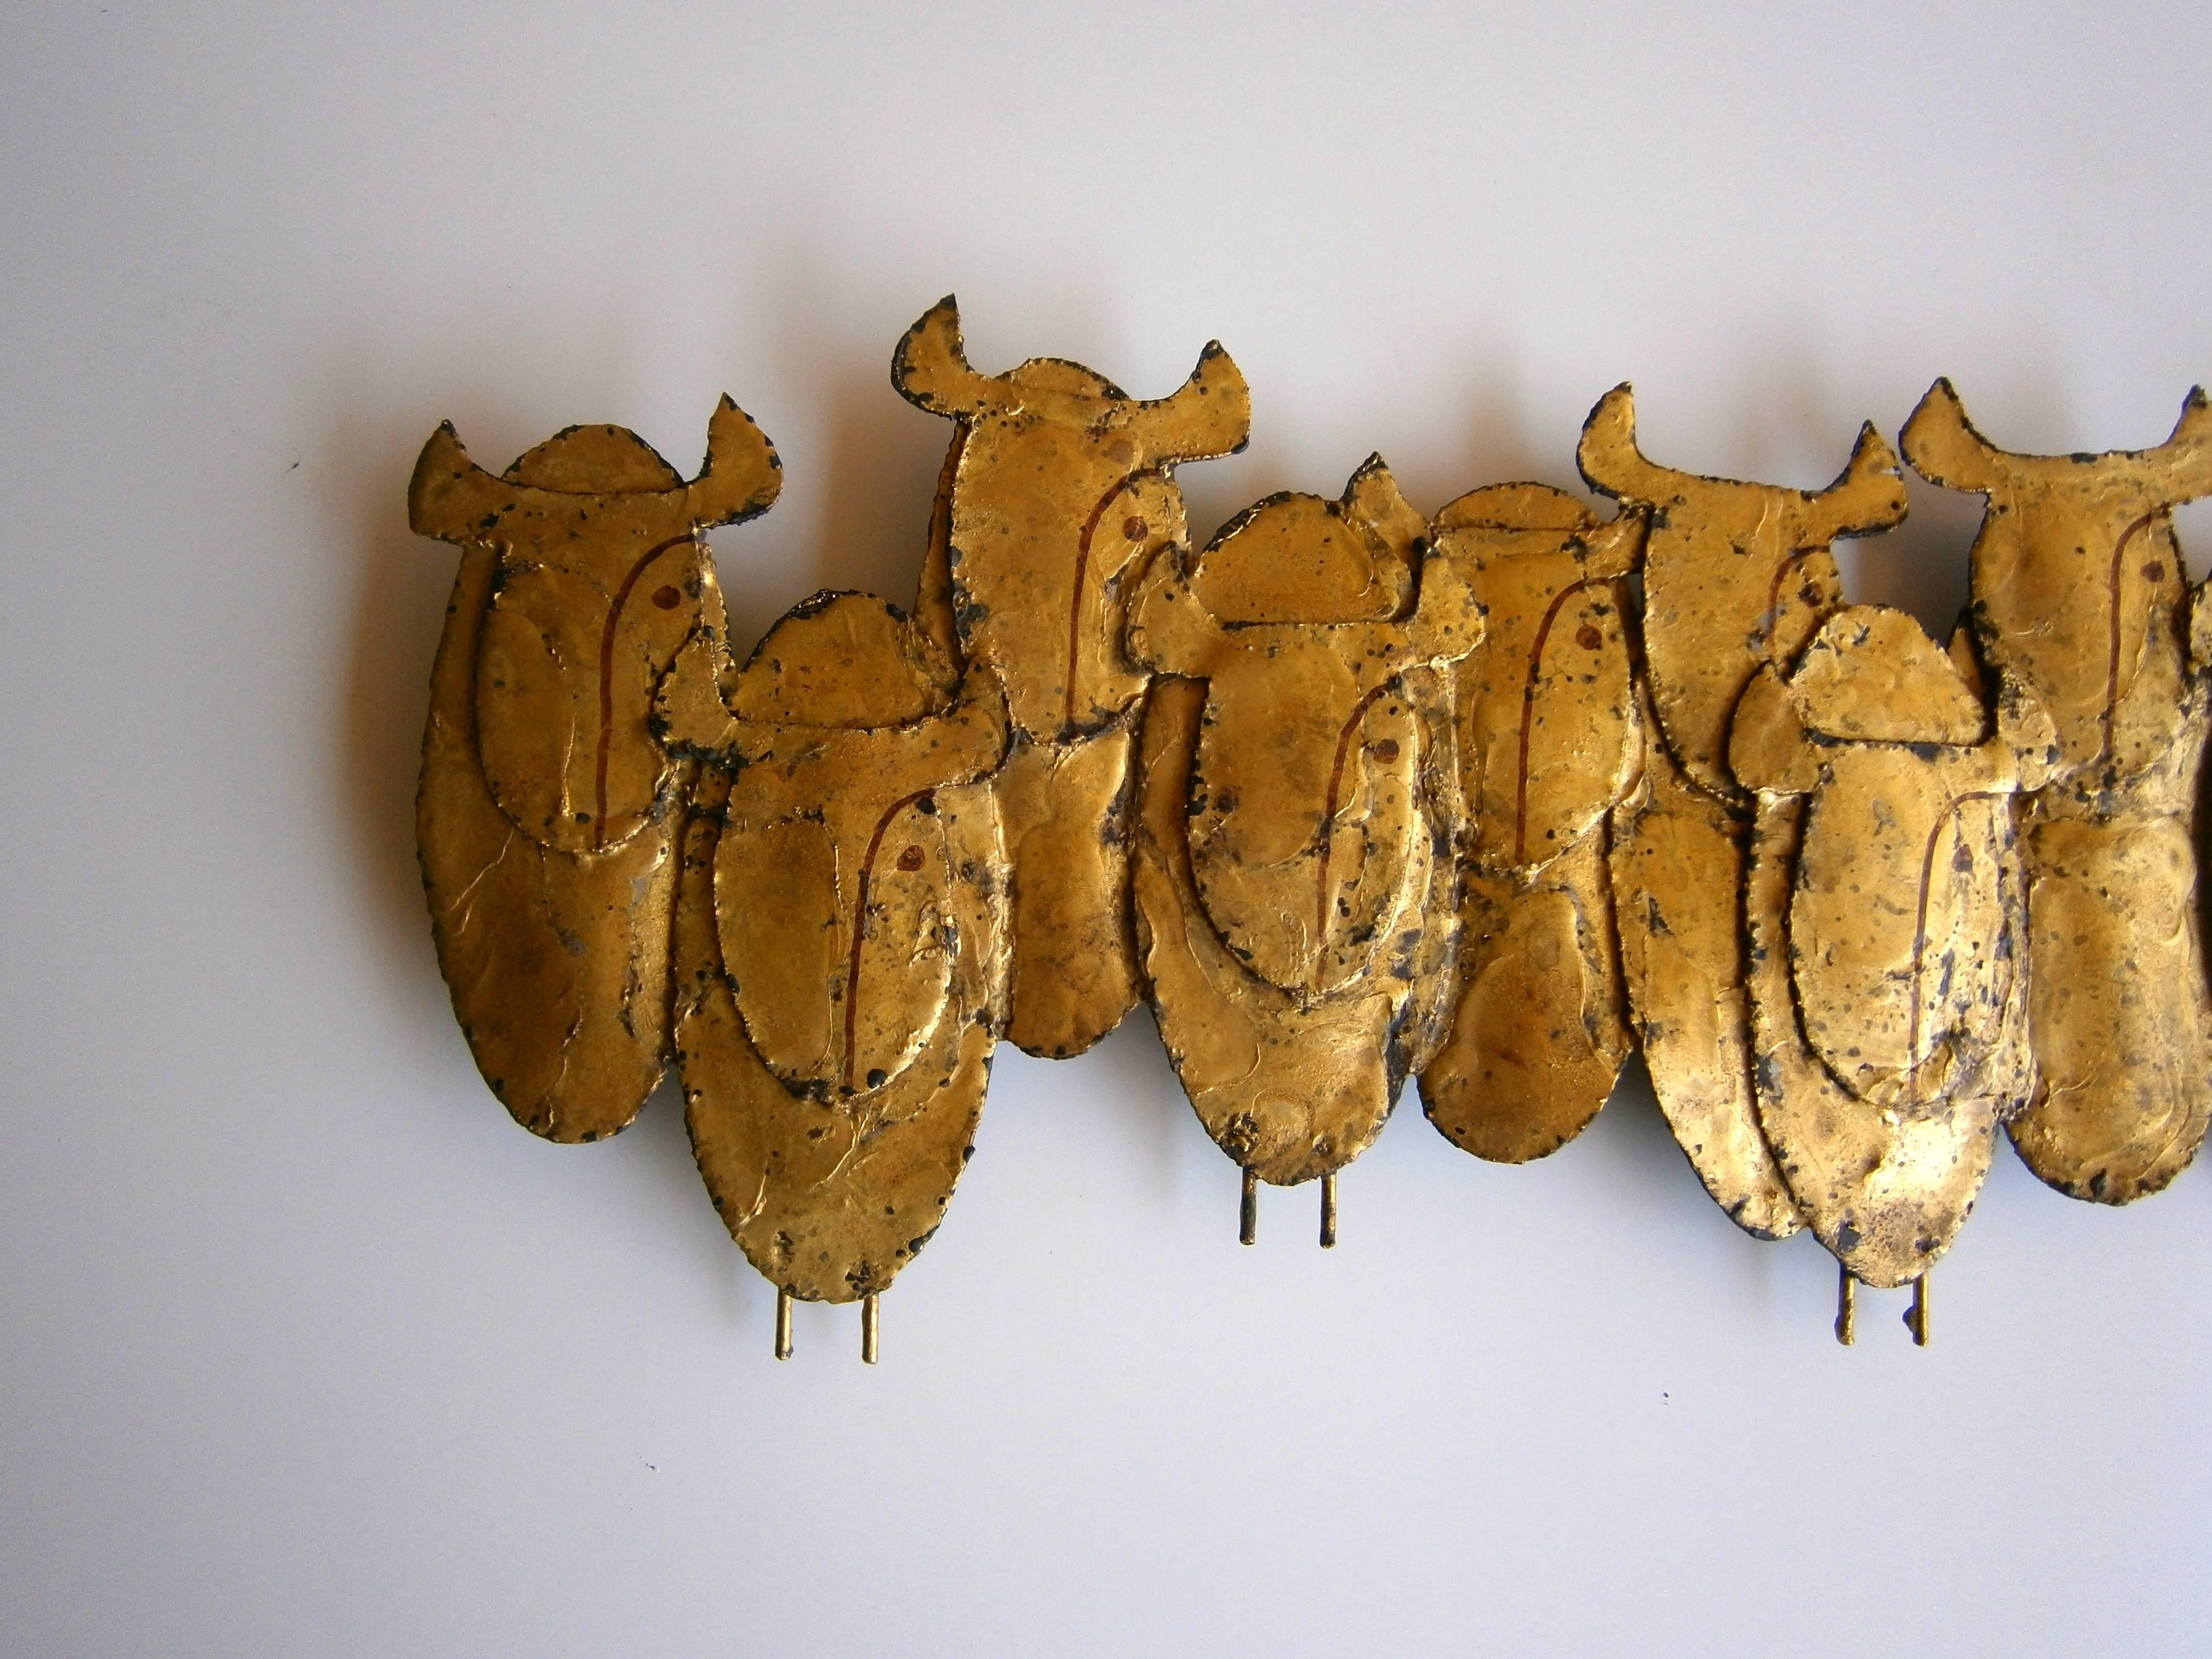 A rare gilded steel wall sculpture depicting a stylized group of 